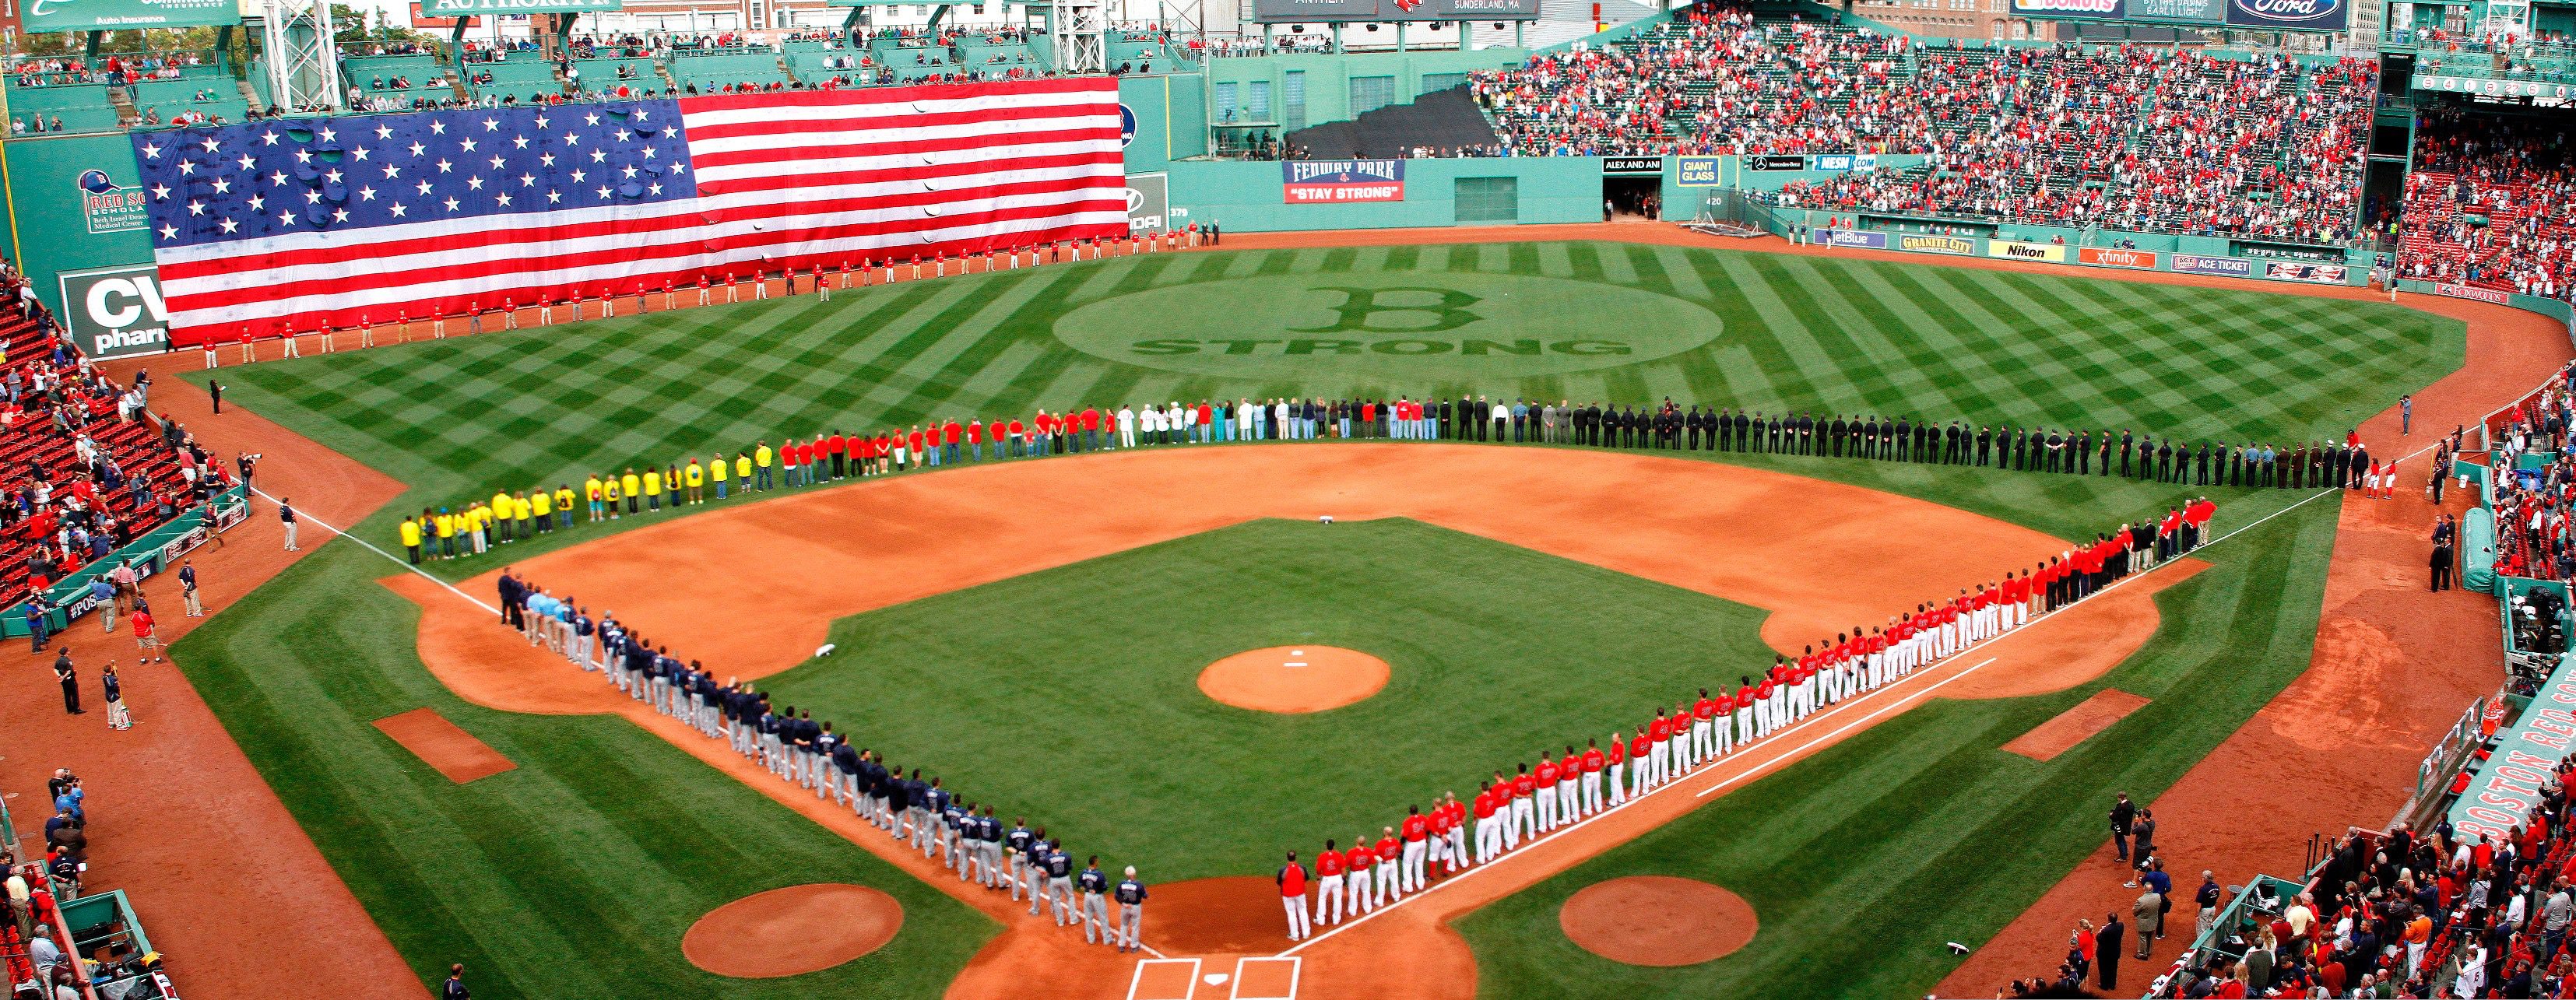 Fenway Park in 2013. (Photo by Marissa McClain/Boston Red Sox)